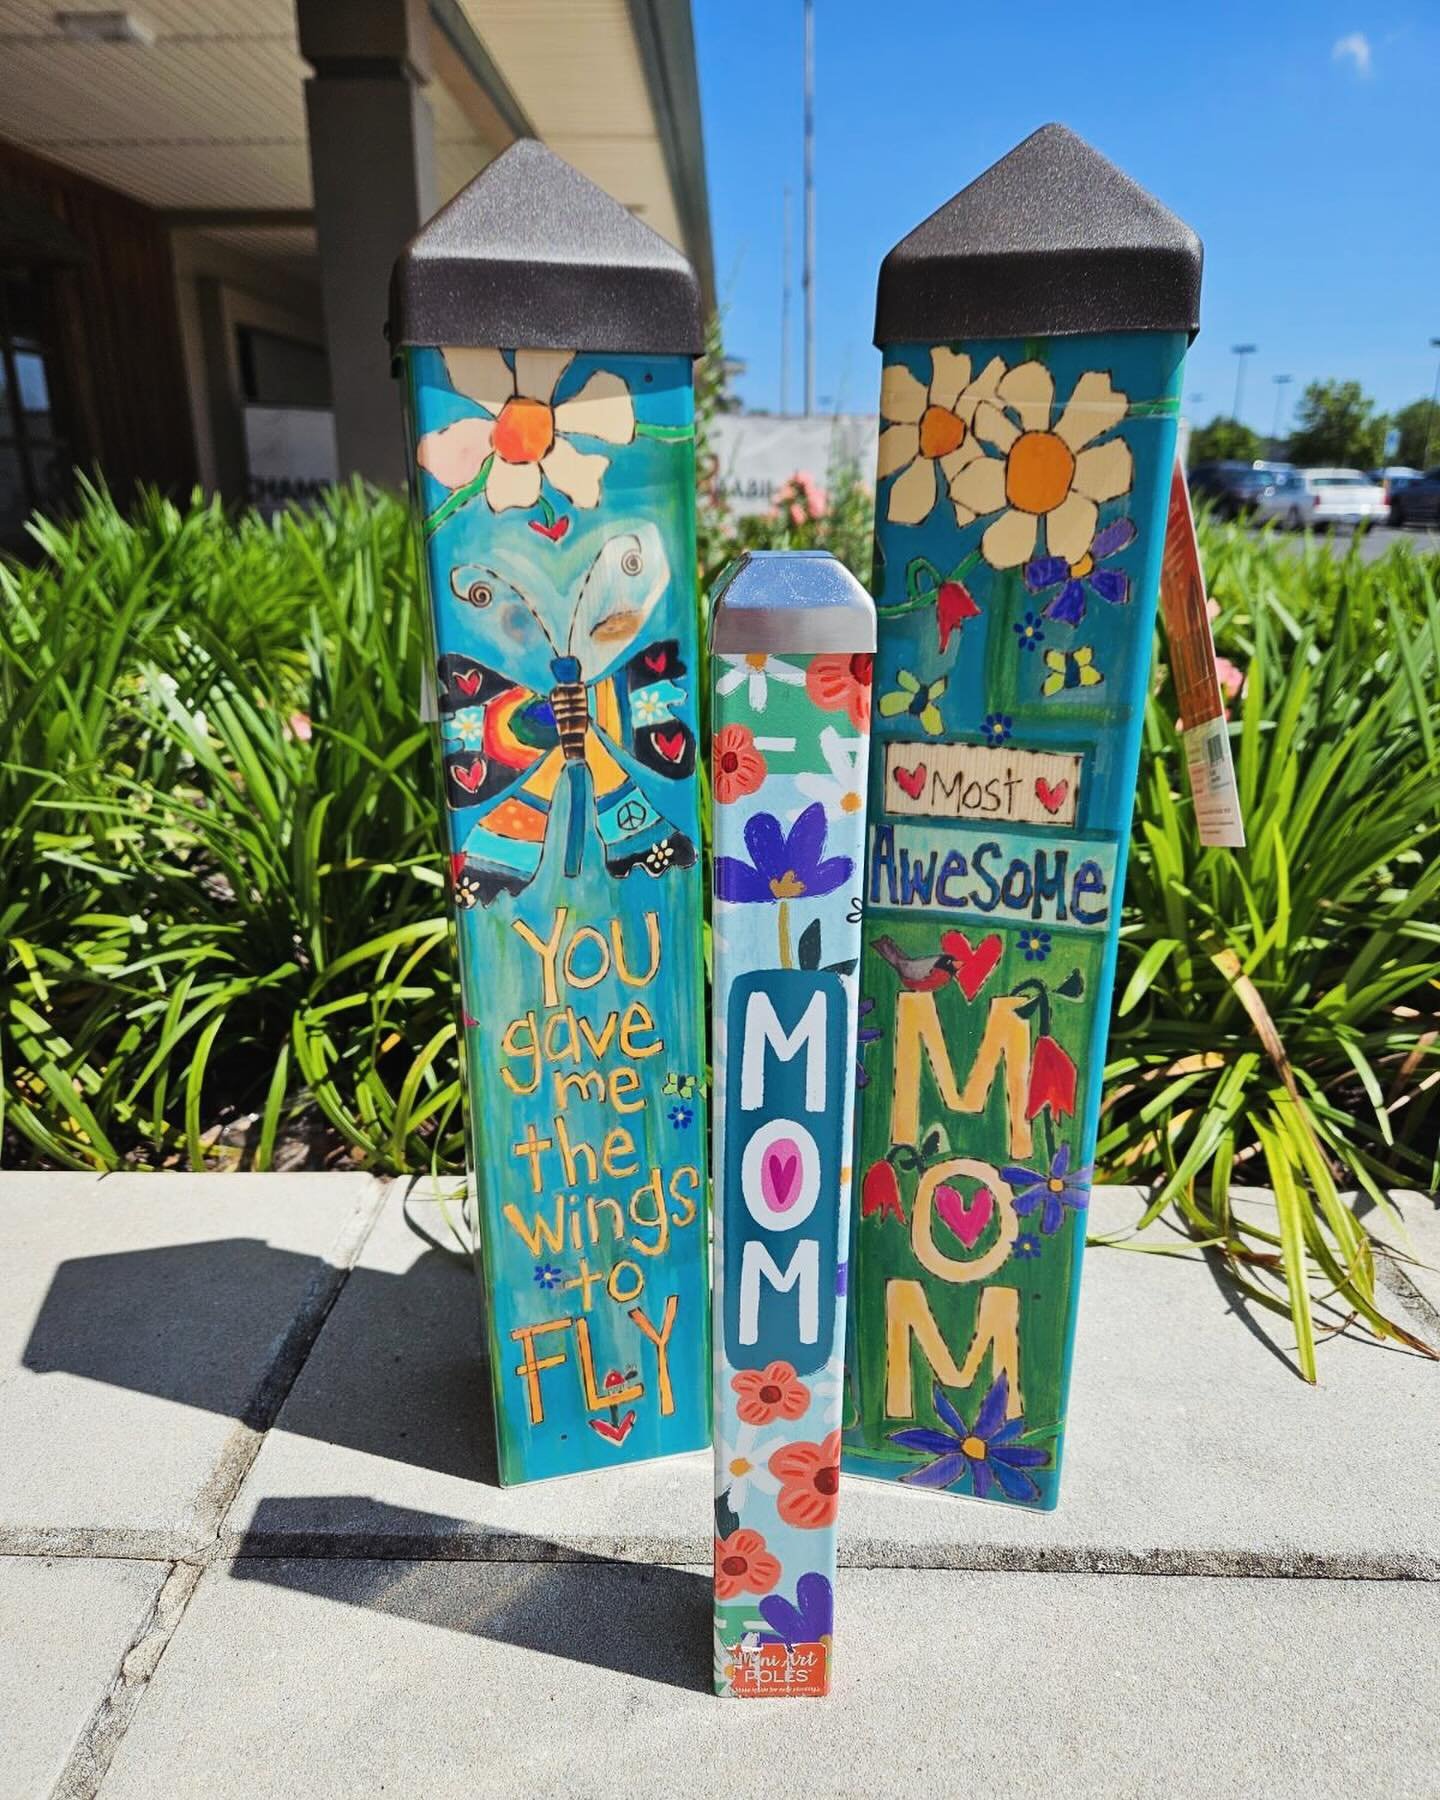 Pssst - Mother&rsquo;s Day is right around the corner! Have you gotten something special for the moms and mother-like folks in your life? We&rsquo;re here to help! These adorable peace poles are in the shop as are gorgeous wind chimes, delightful gar